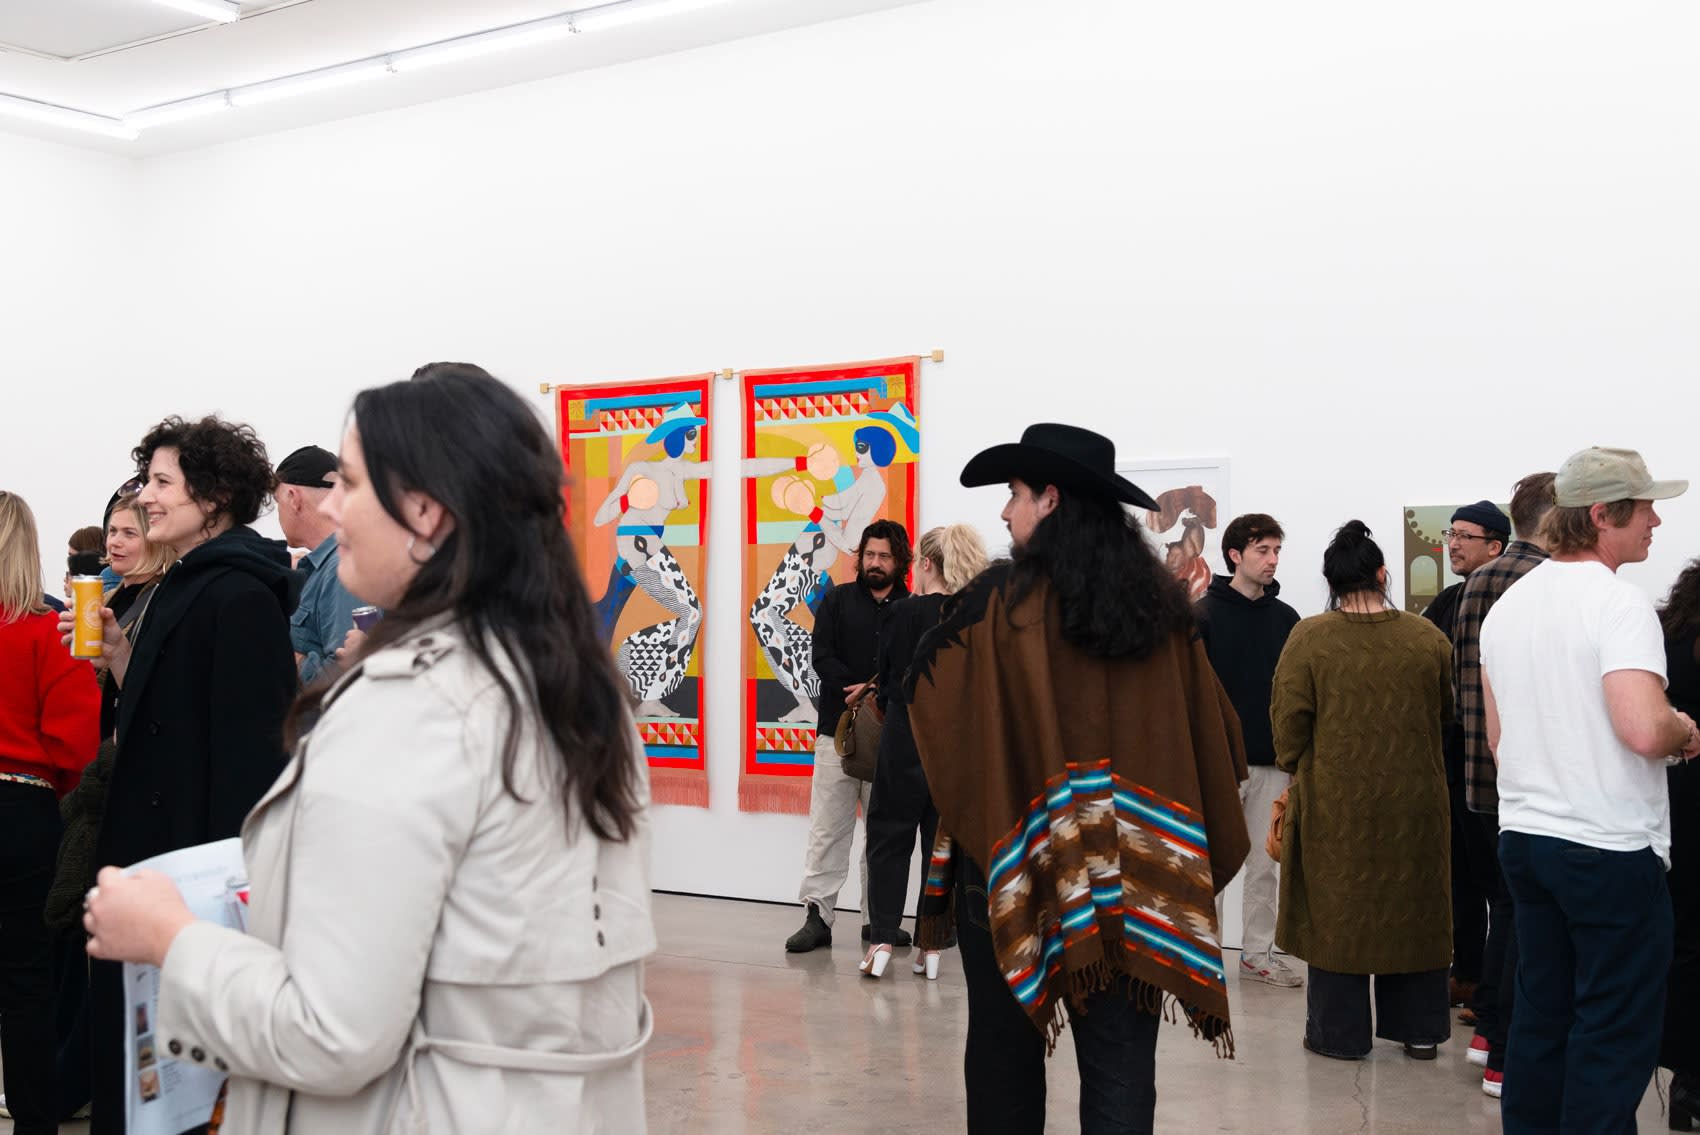 Photo of people standing in the gallery talking and looking at the art on the walls